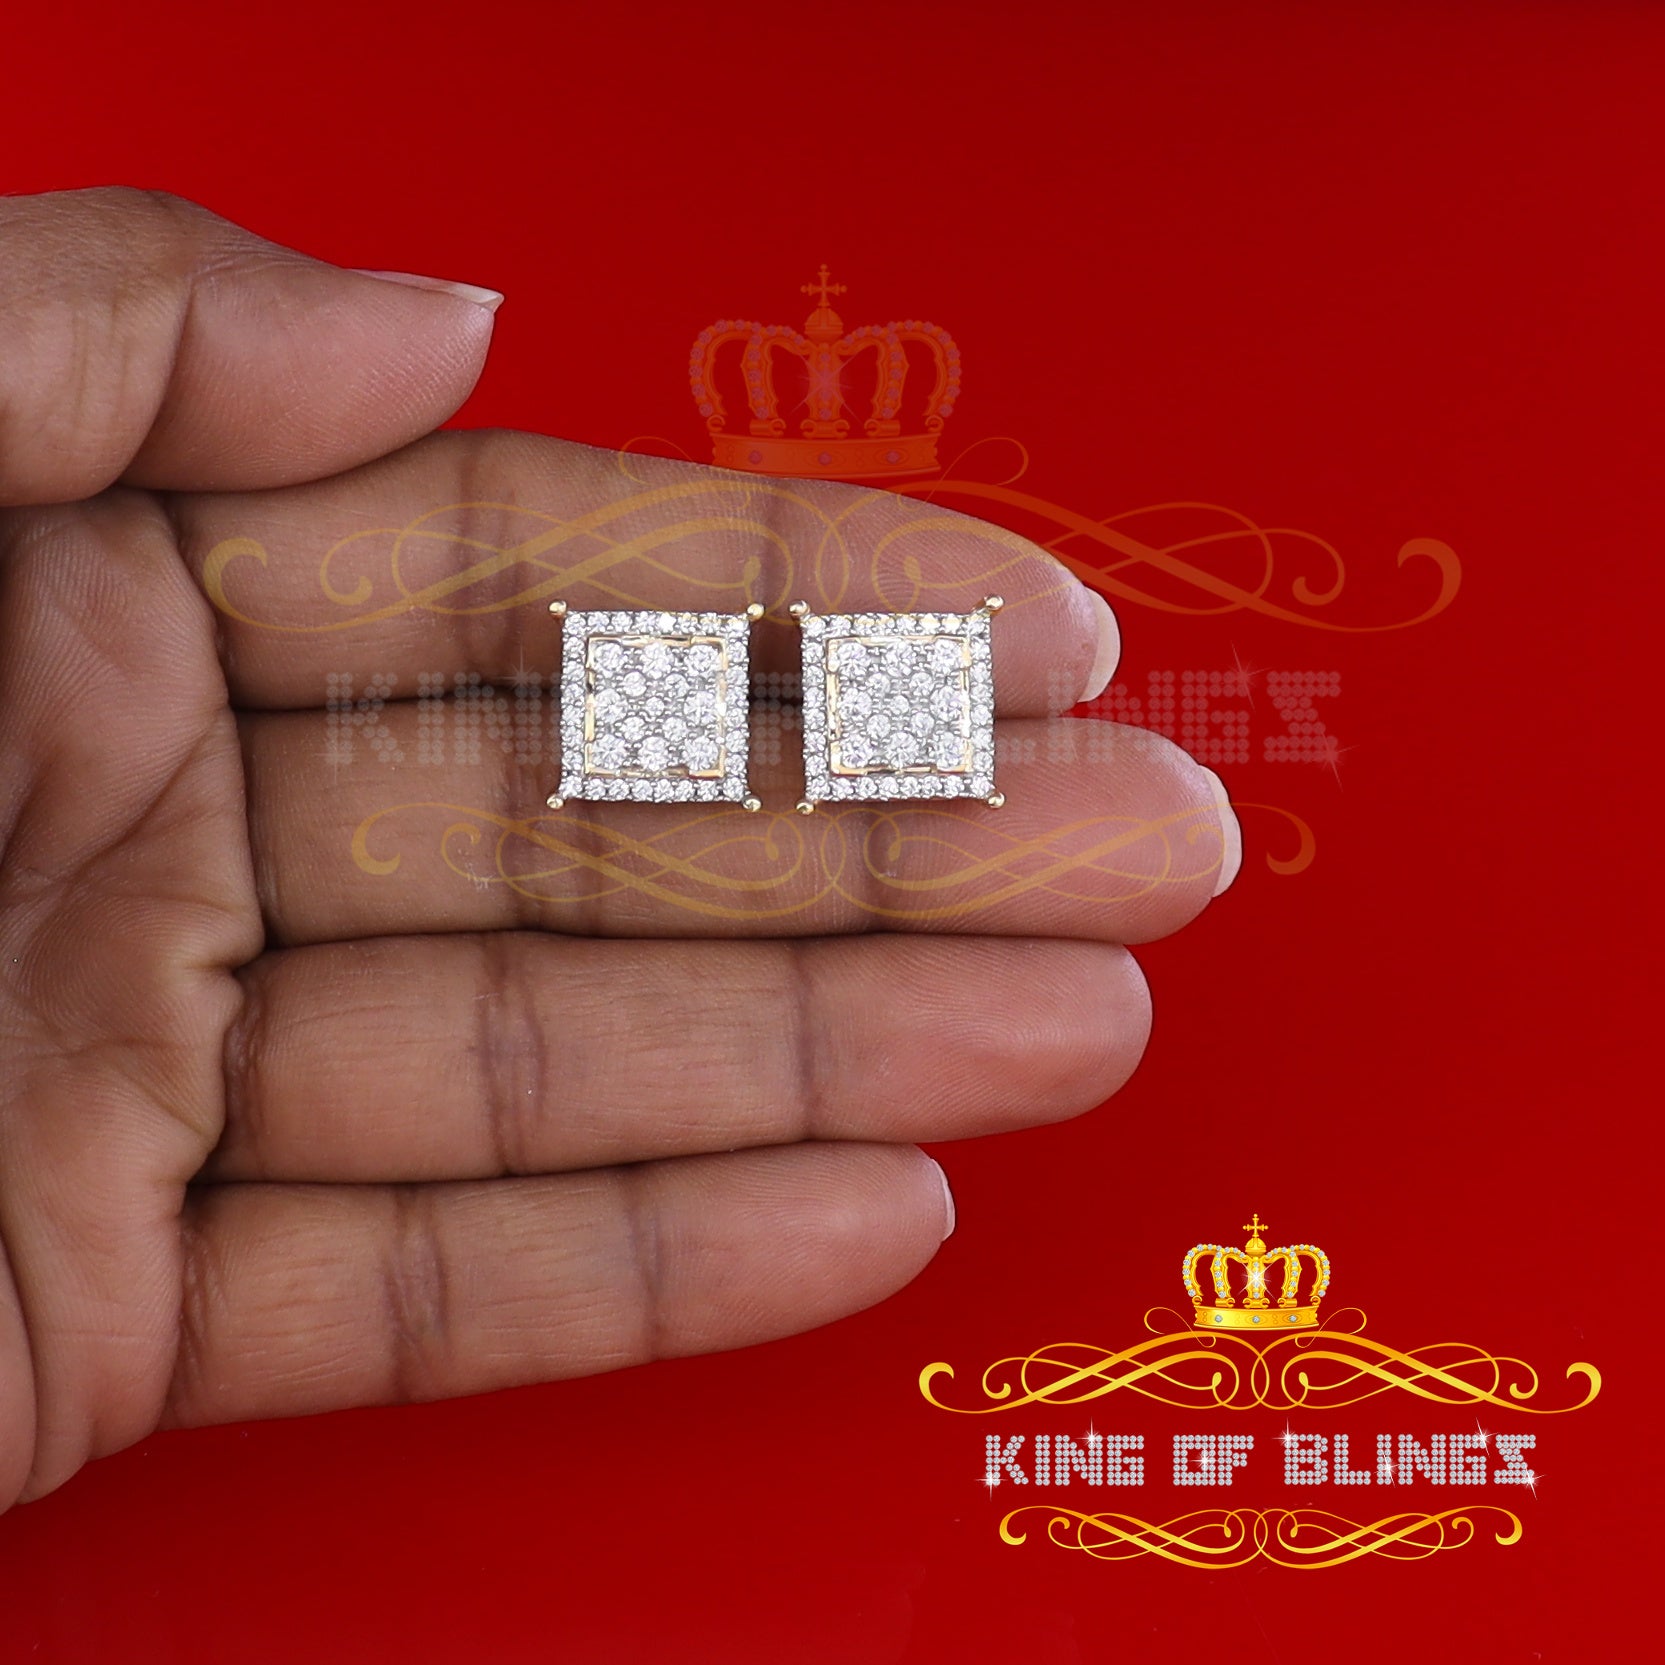 King of Bling's Hip Hop 925 Yellow Sterling Silver 2.73ct Cubic Zirconia Women's Square Earrings KING OF BLINGS